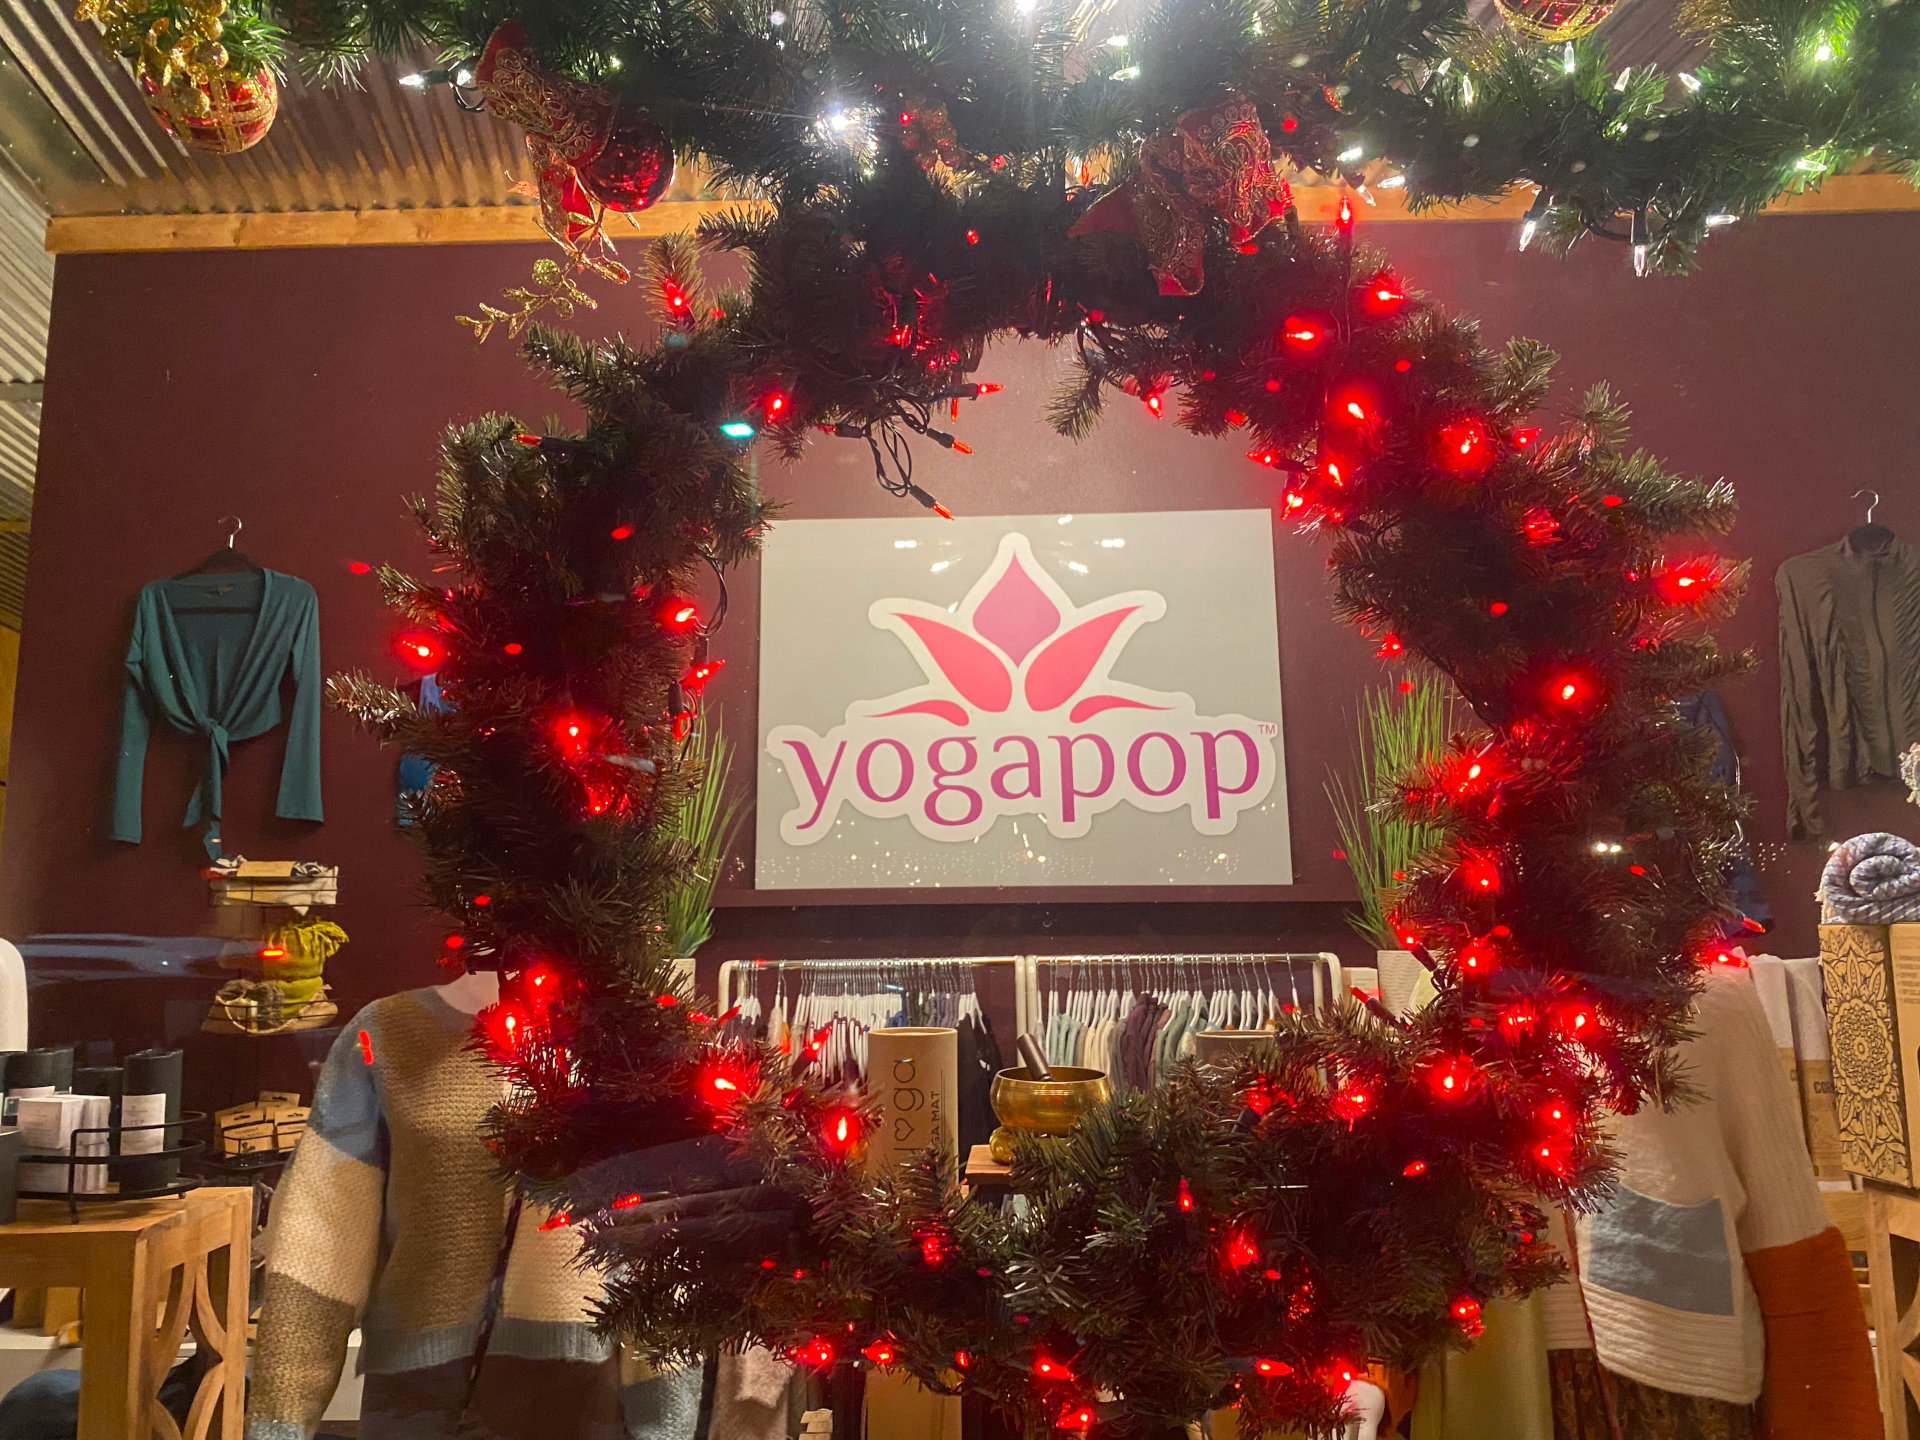 Introducing Yogapop, for all your yoga needs!